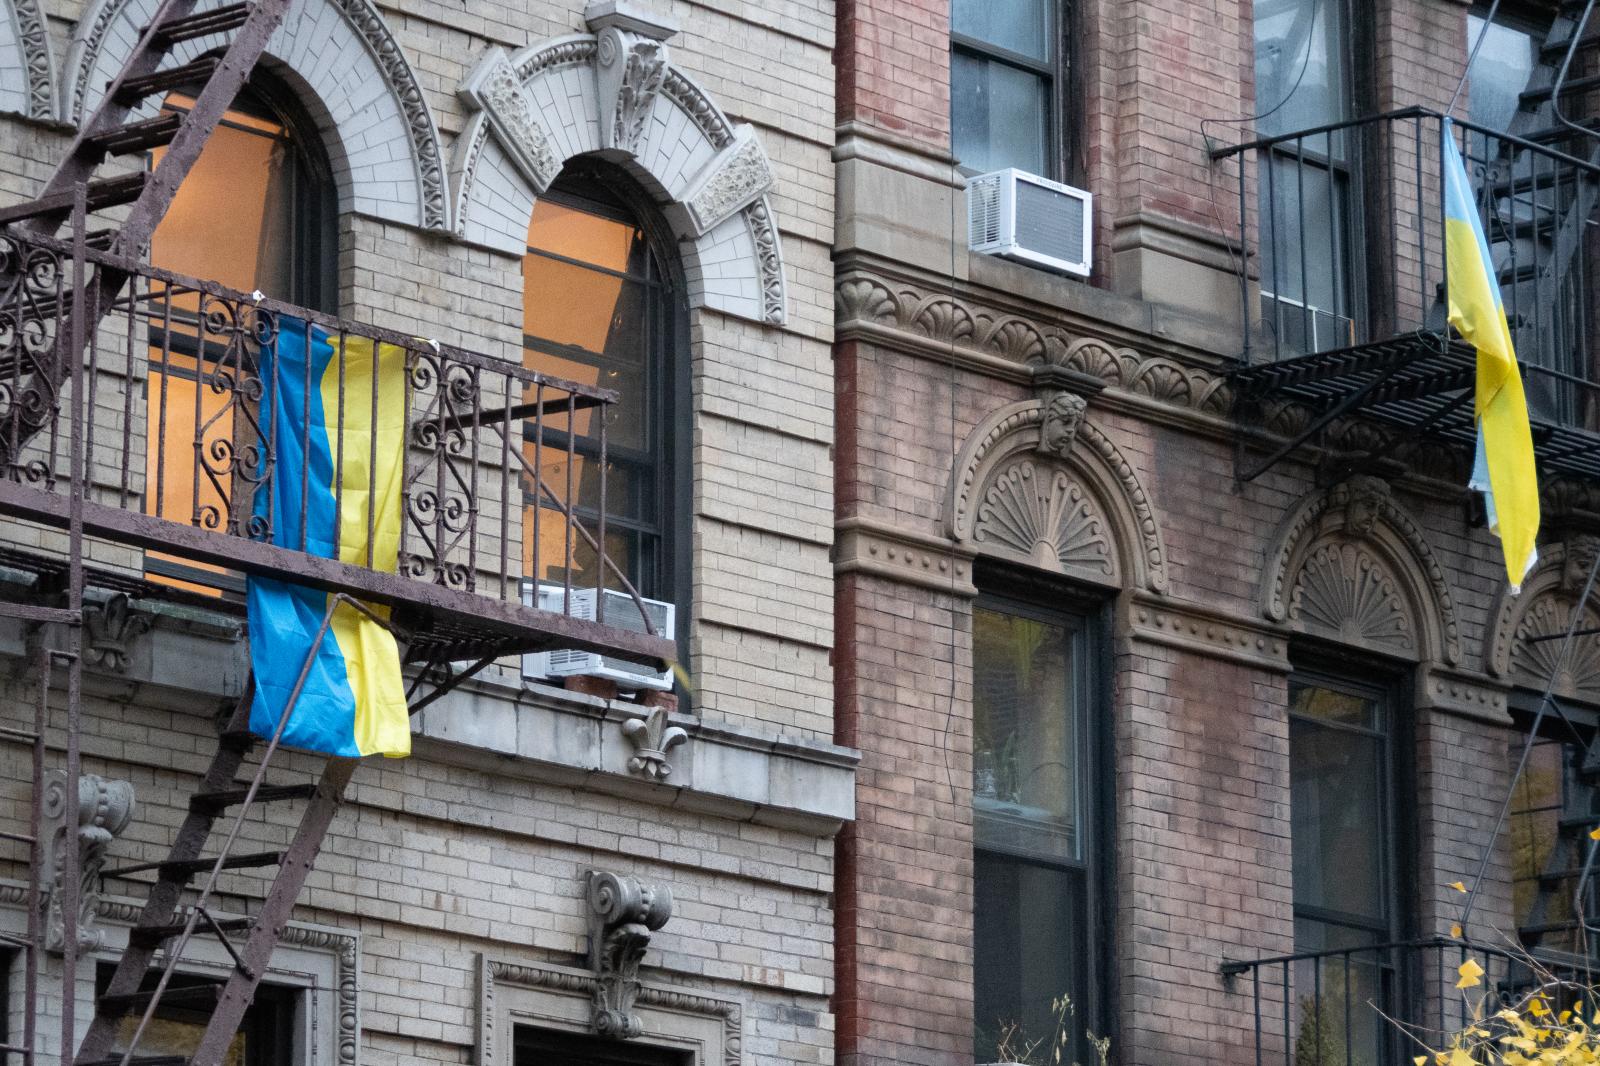 East 6th St. Supports Ukraine